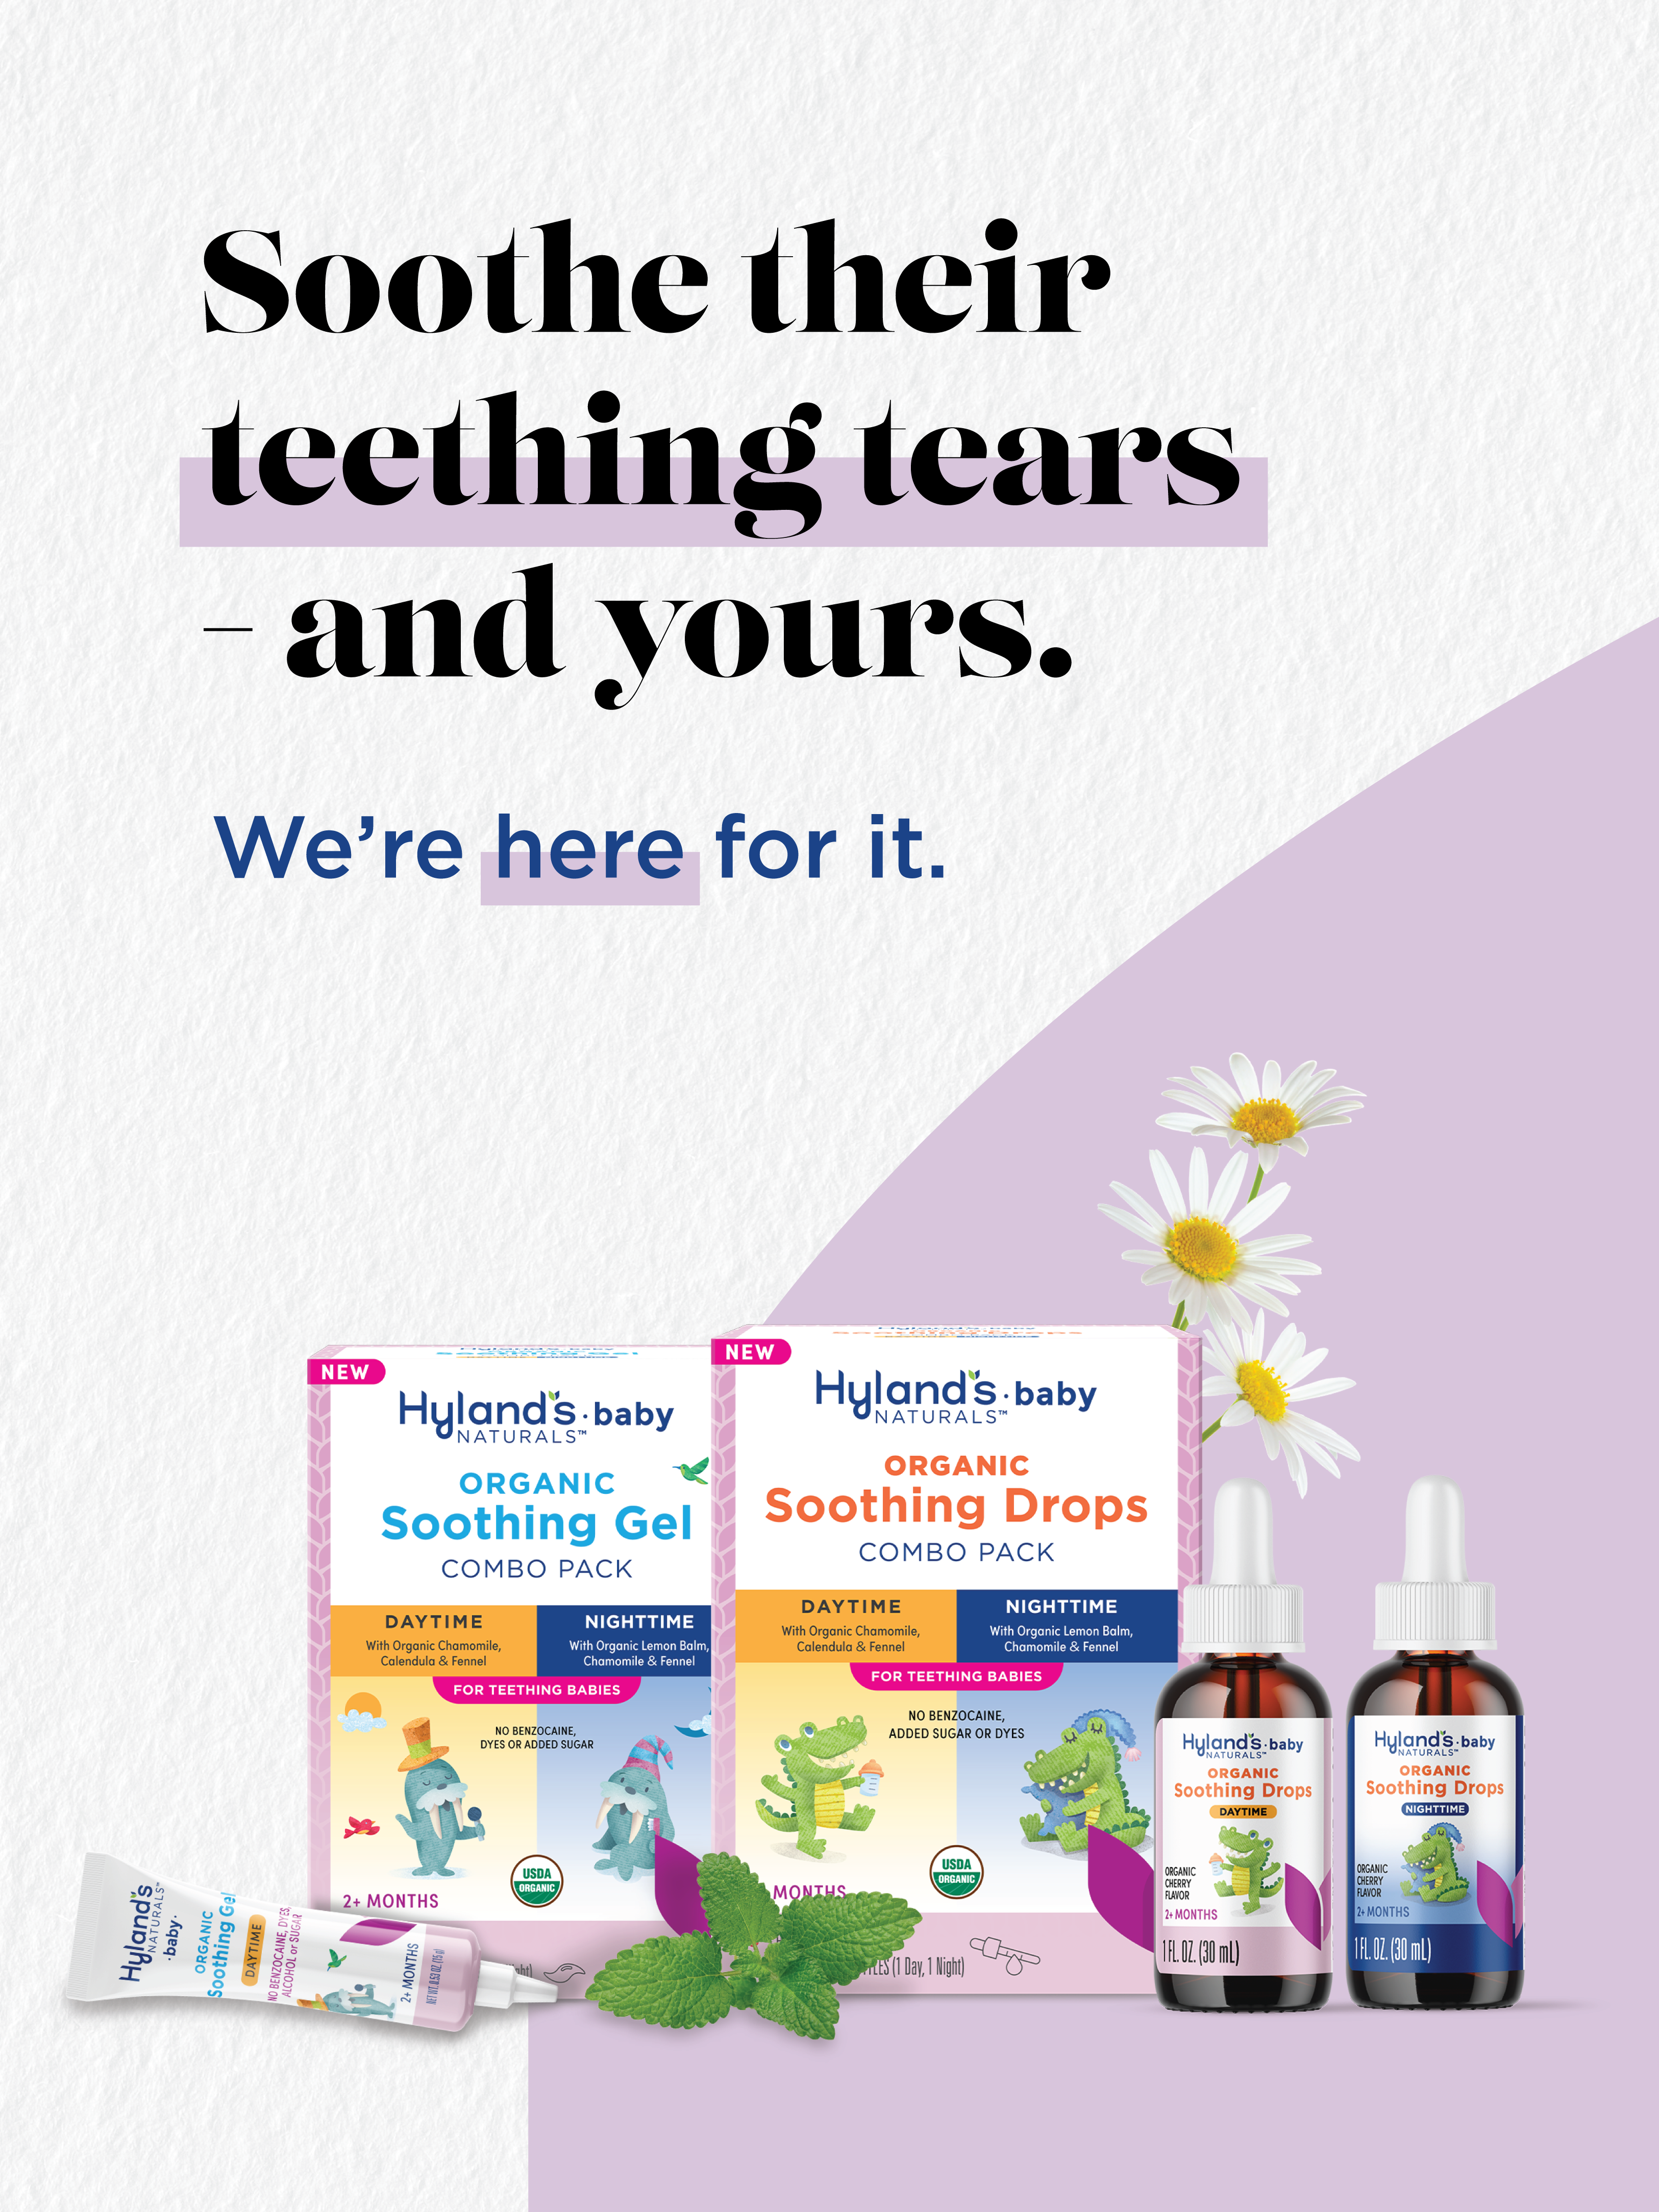 Soothe their teething tears - and yours.